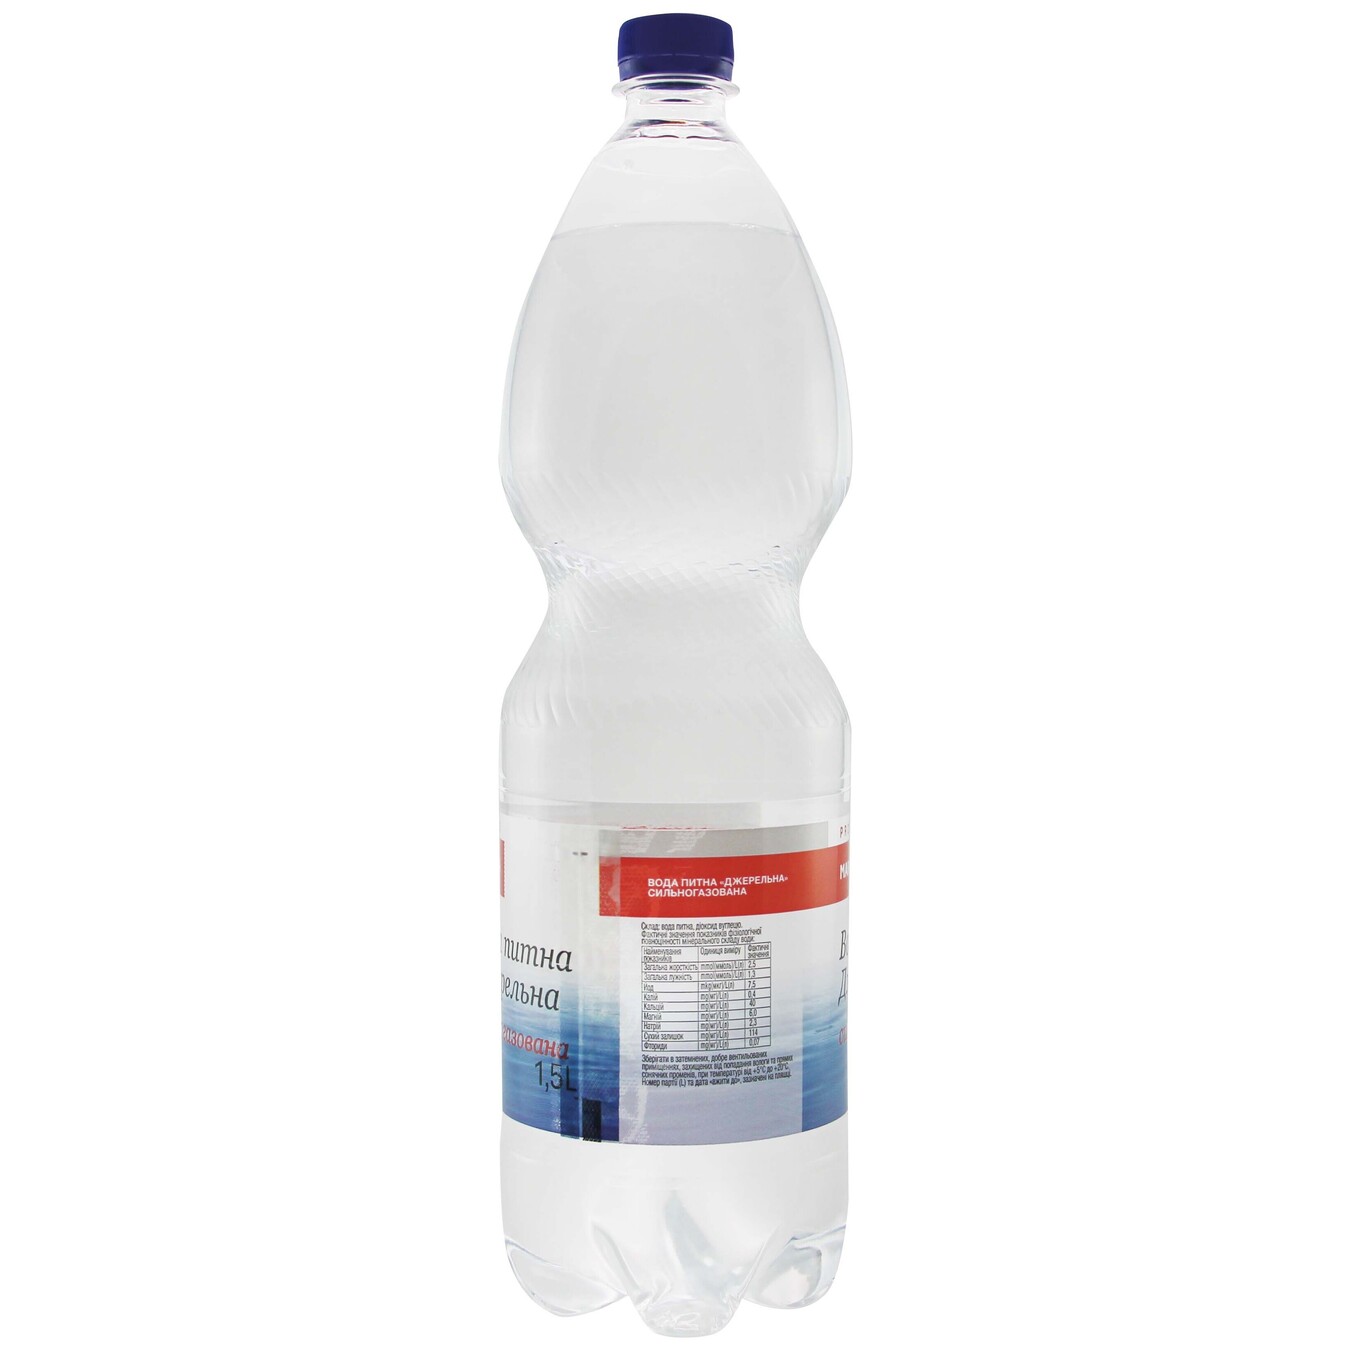 Marka Promo Dzherel'na Highly Carbonated Water 1,5l 2